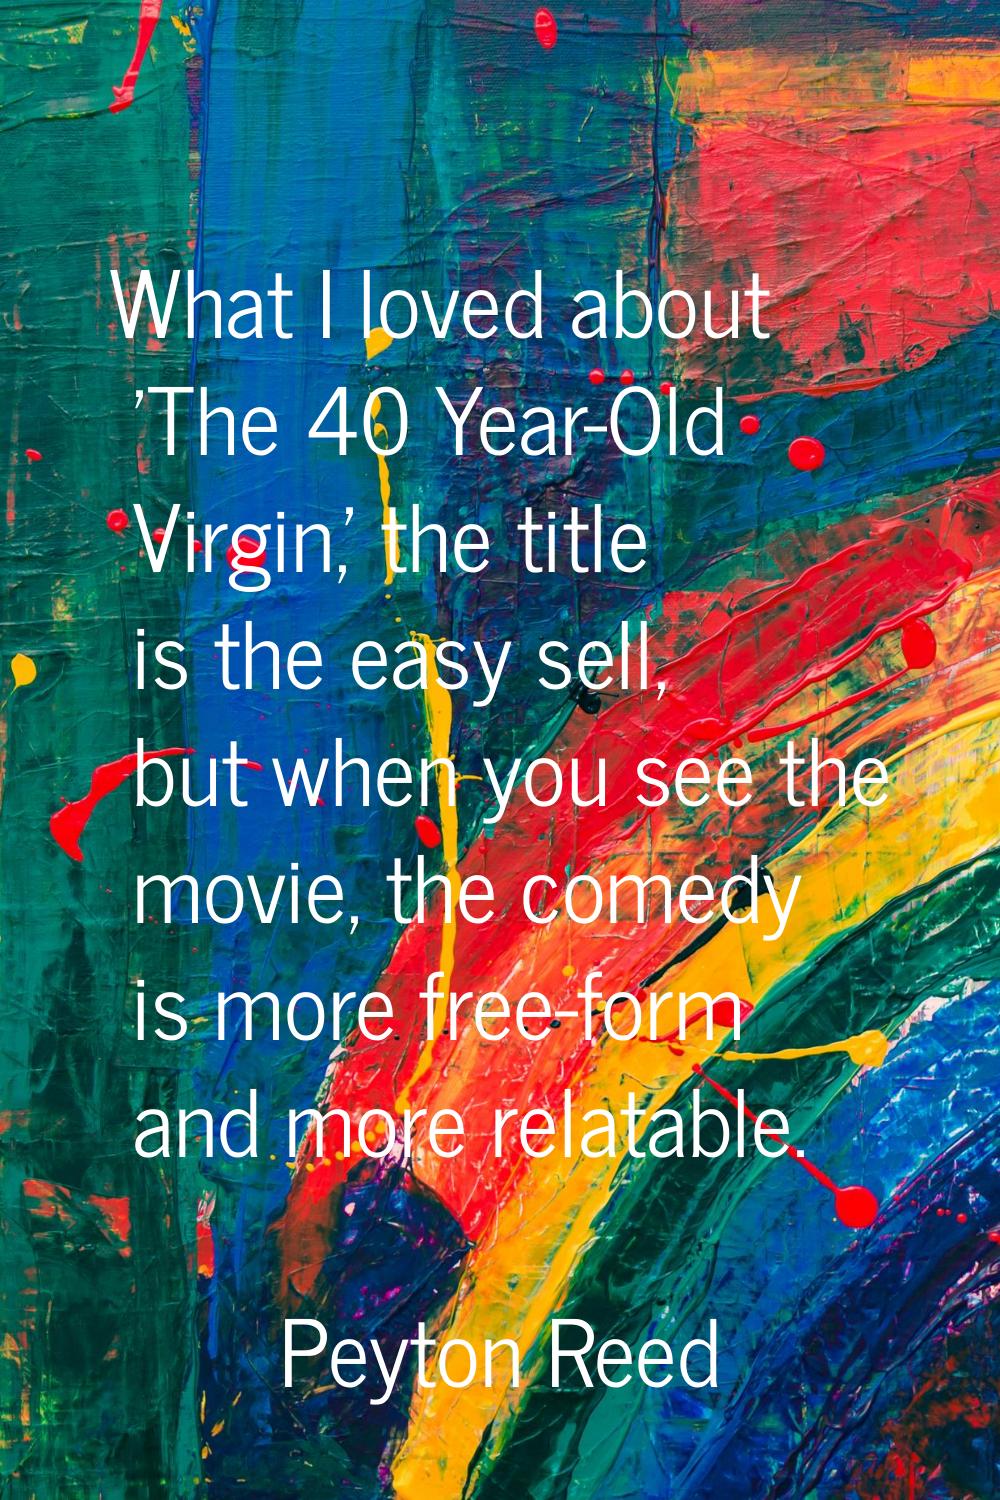 What I loved about 'The 40 Year-Old Virgin,' the title is the easy sell, but when you see the movie